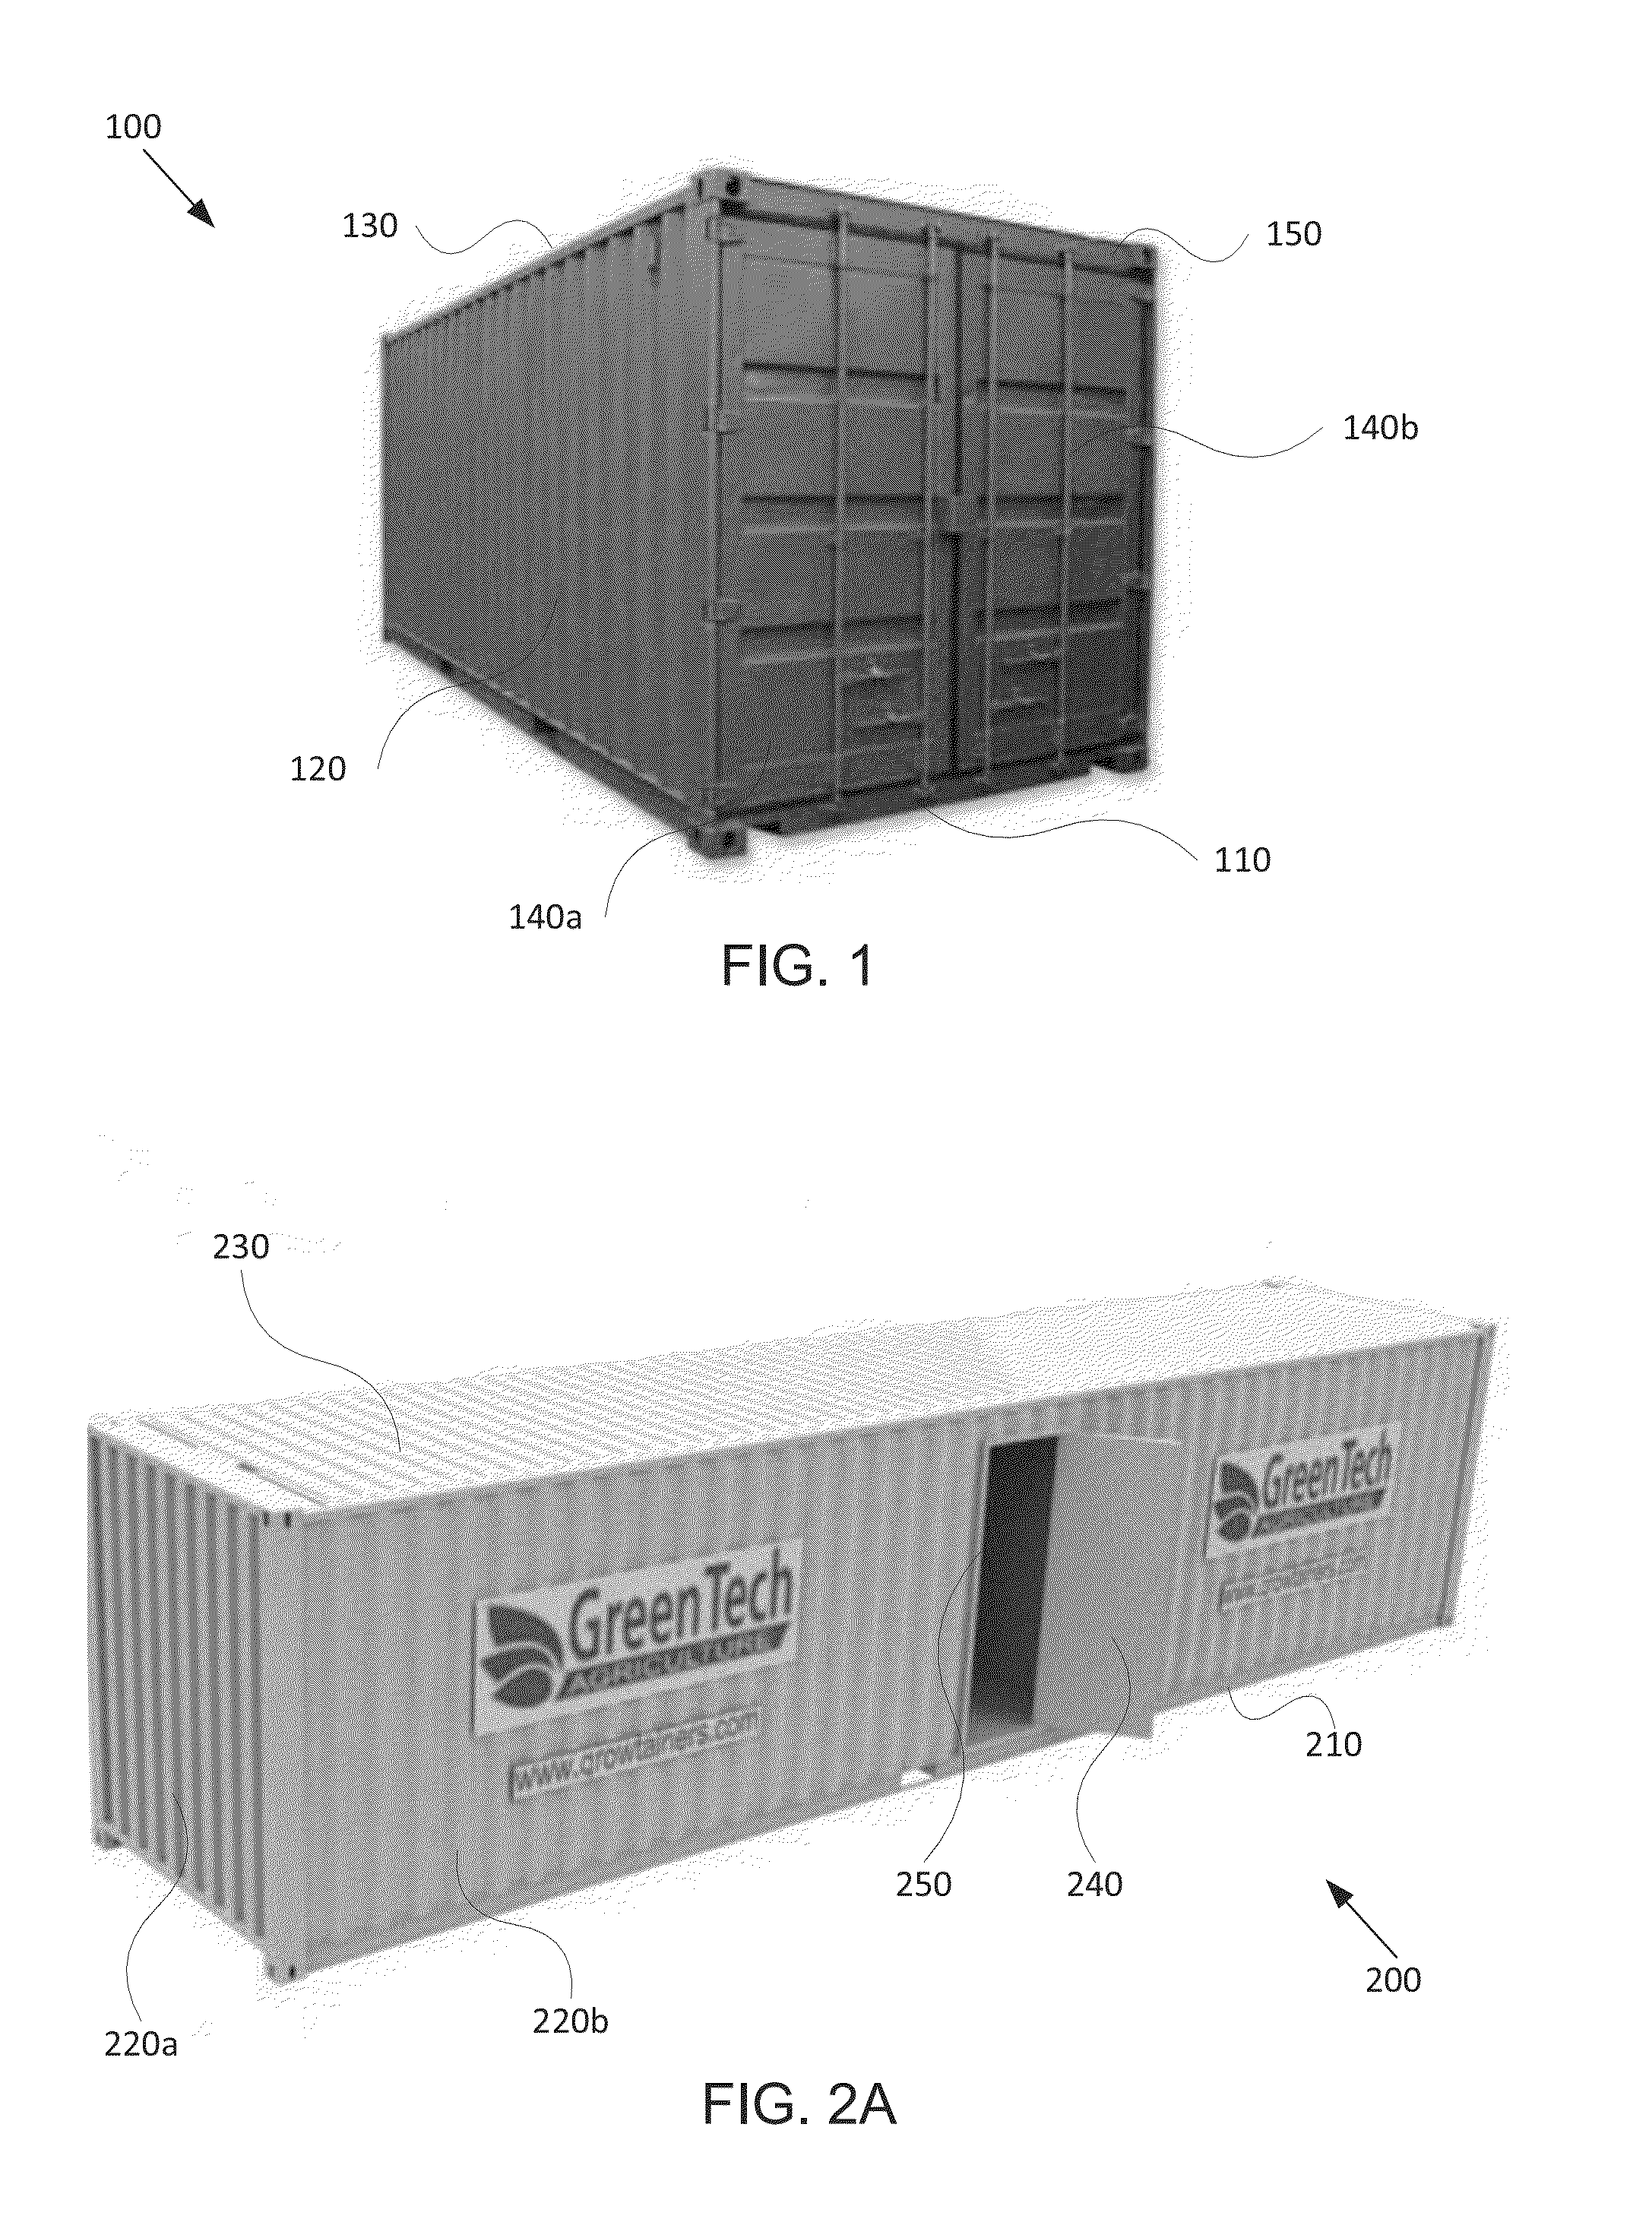 Self-sustaining artificially controllable environment within a storage container or other enclosed space